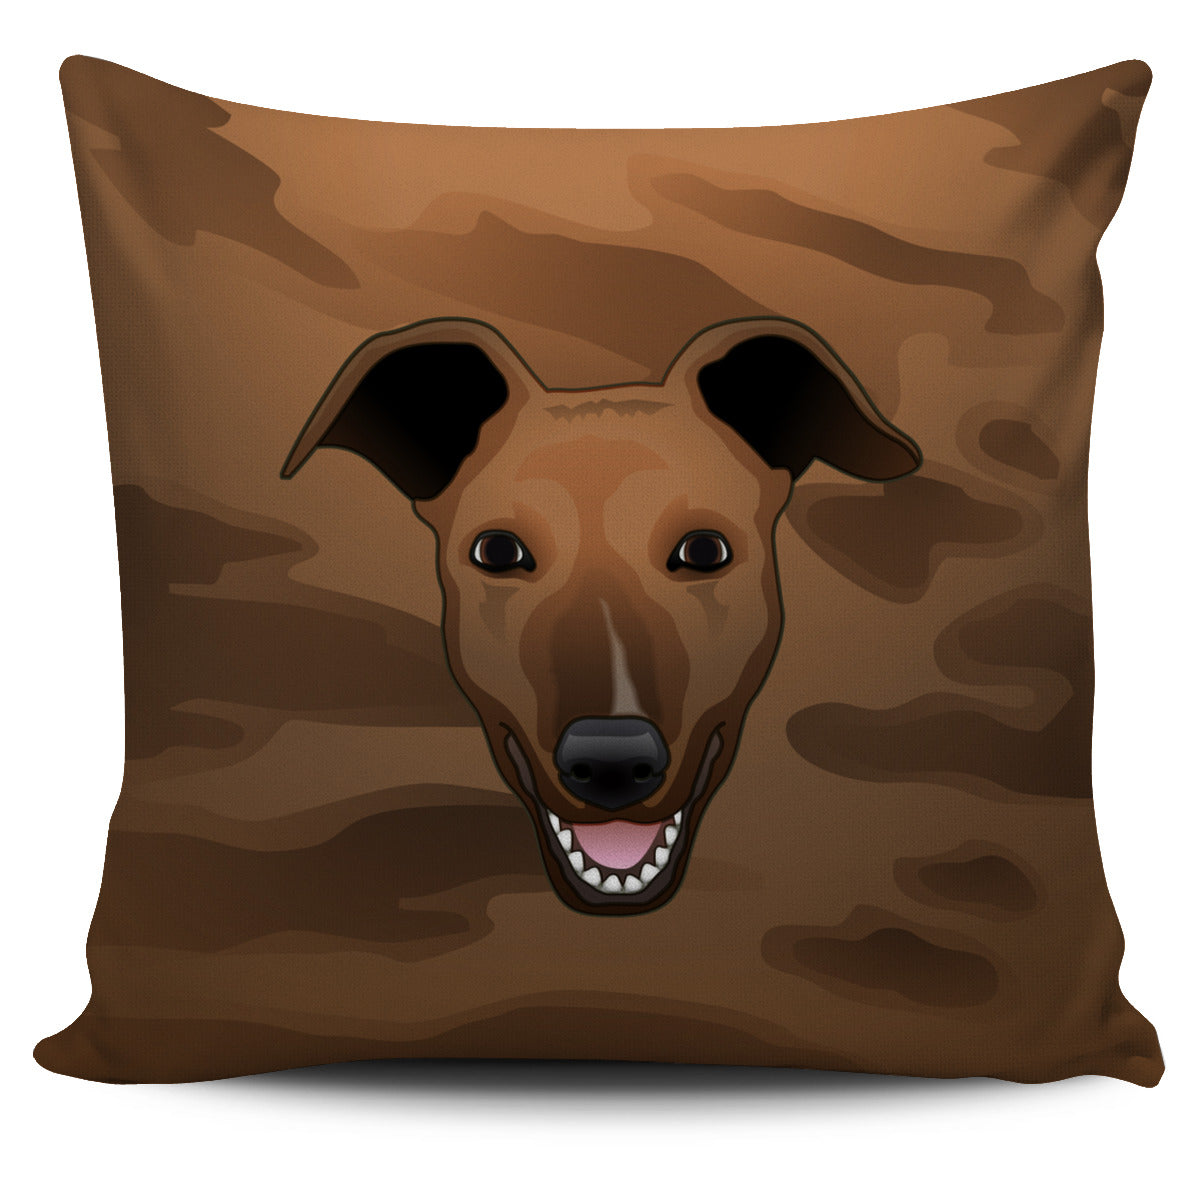 Real Greyhound Pillow Cover